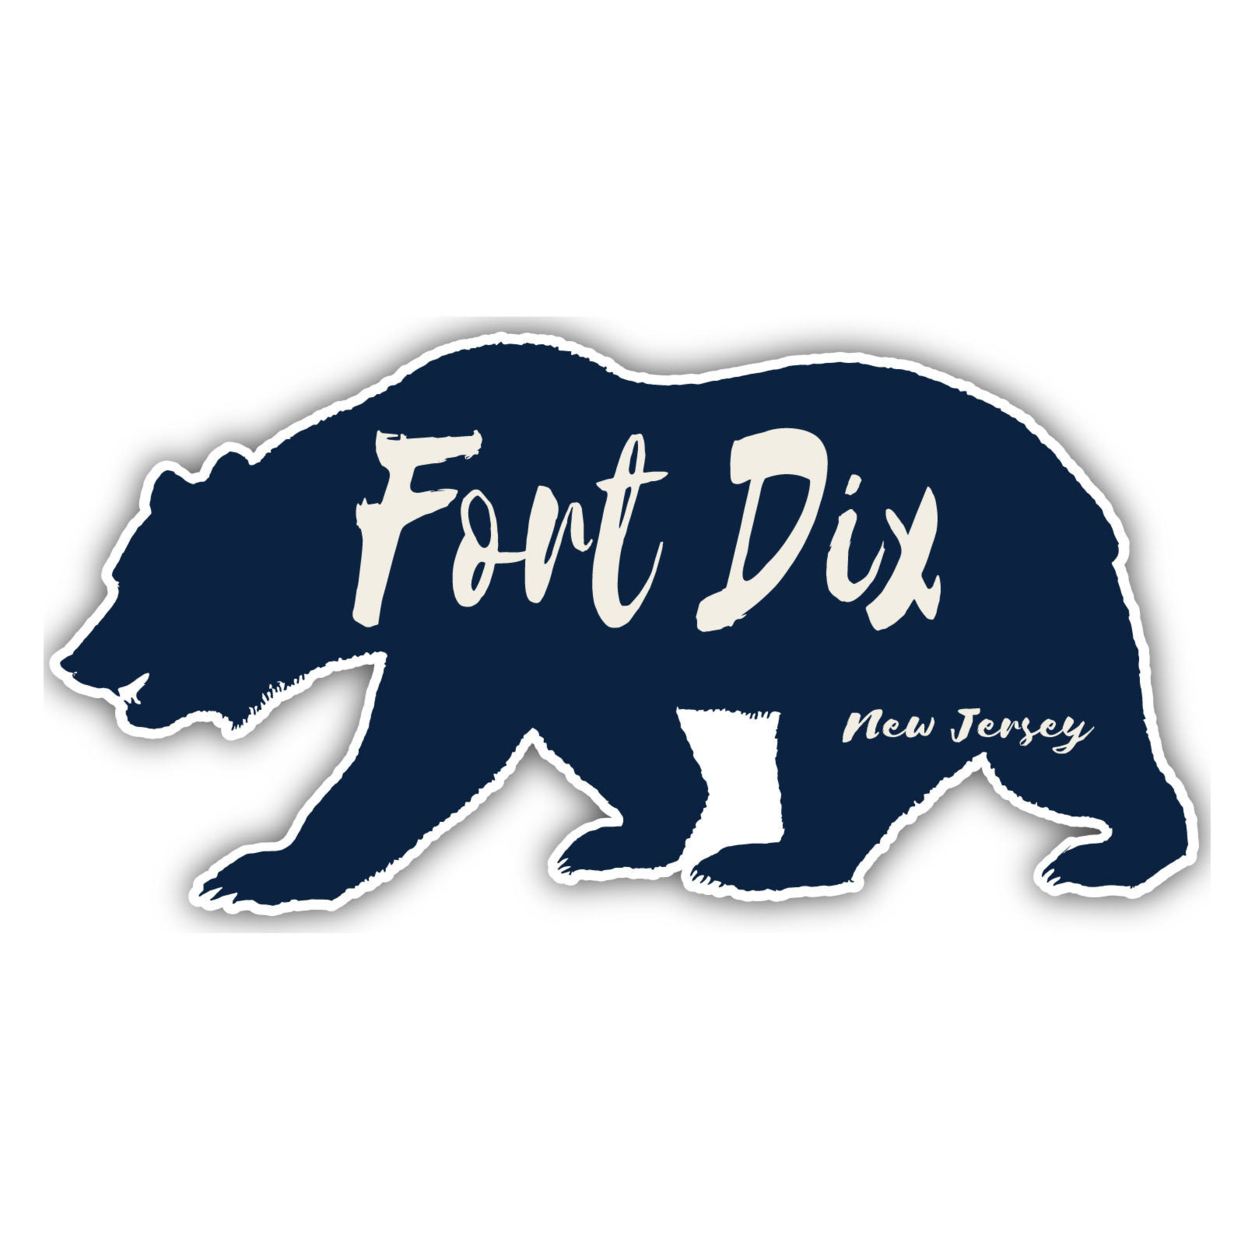 Fort Dix New Jersey Souvenir Decorative Stickers (Choose Theme And Size) - 4-Pack, 10-Inch, Bear